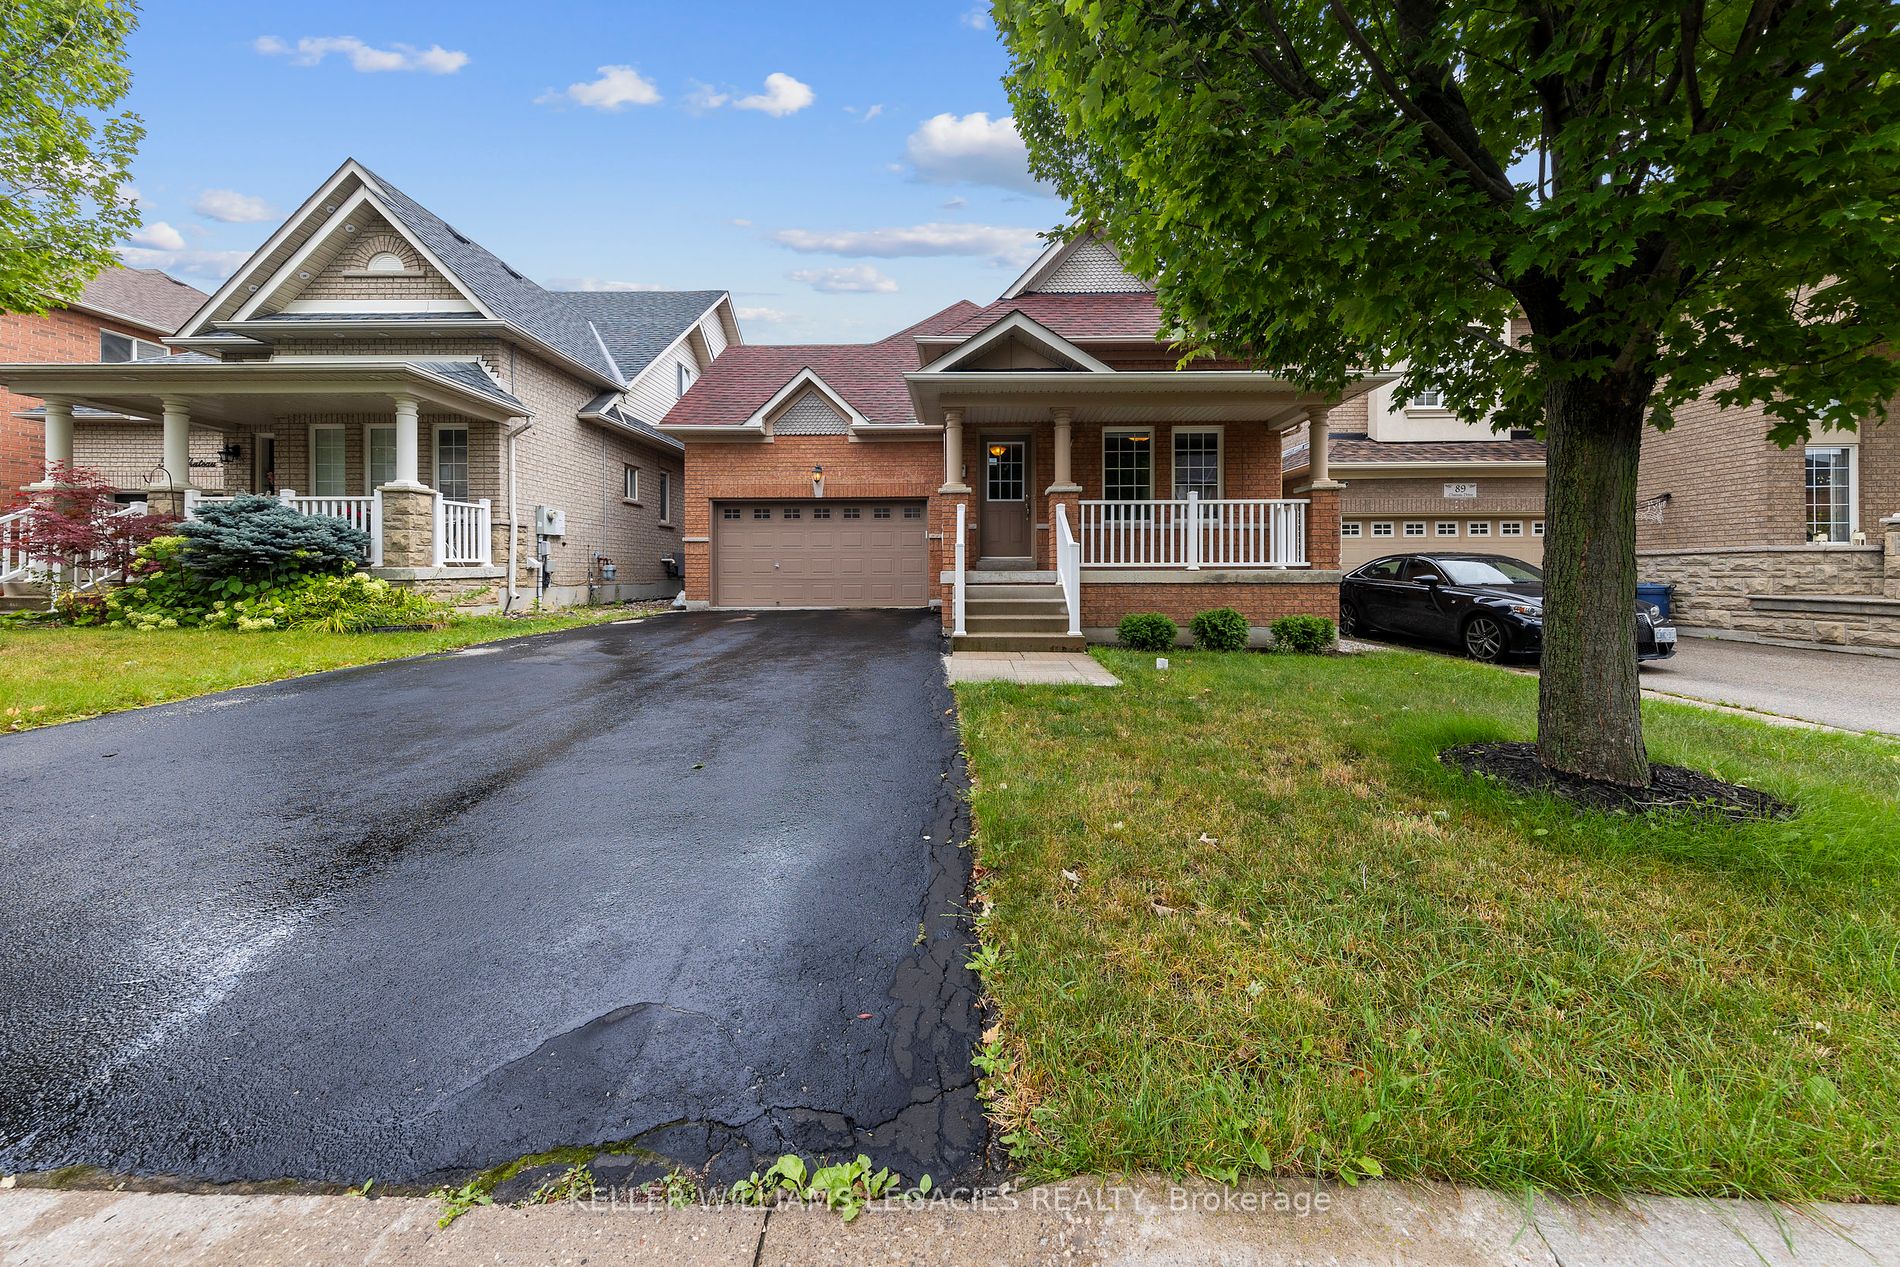 Detached house for sale at 93 Chateau Dr Vaughan Ontario